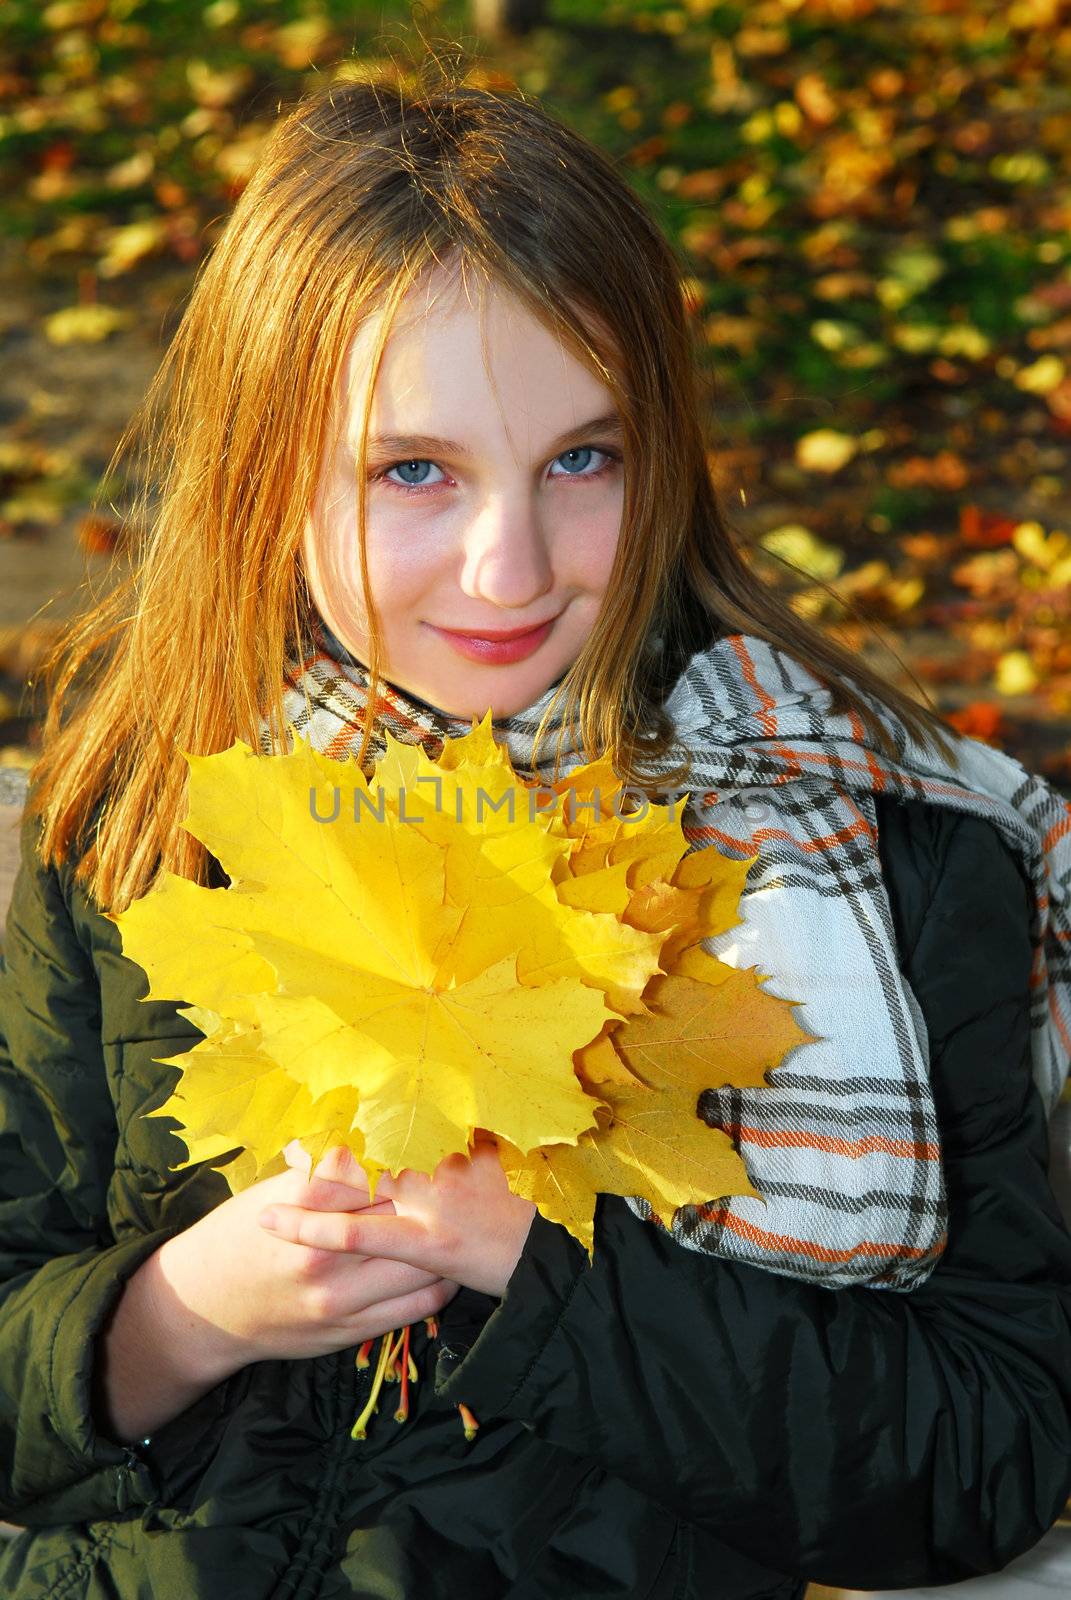 Portrait of a beautiful teenage girl with yellow fall maple leaves